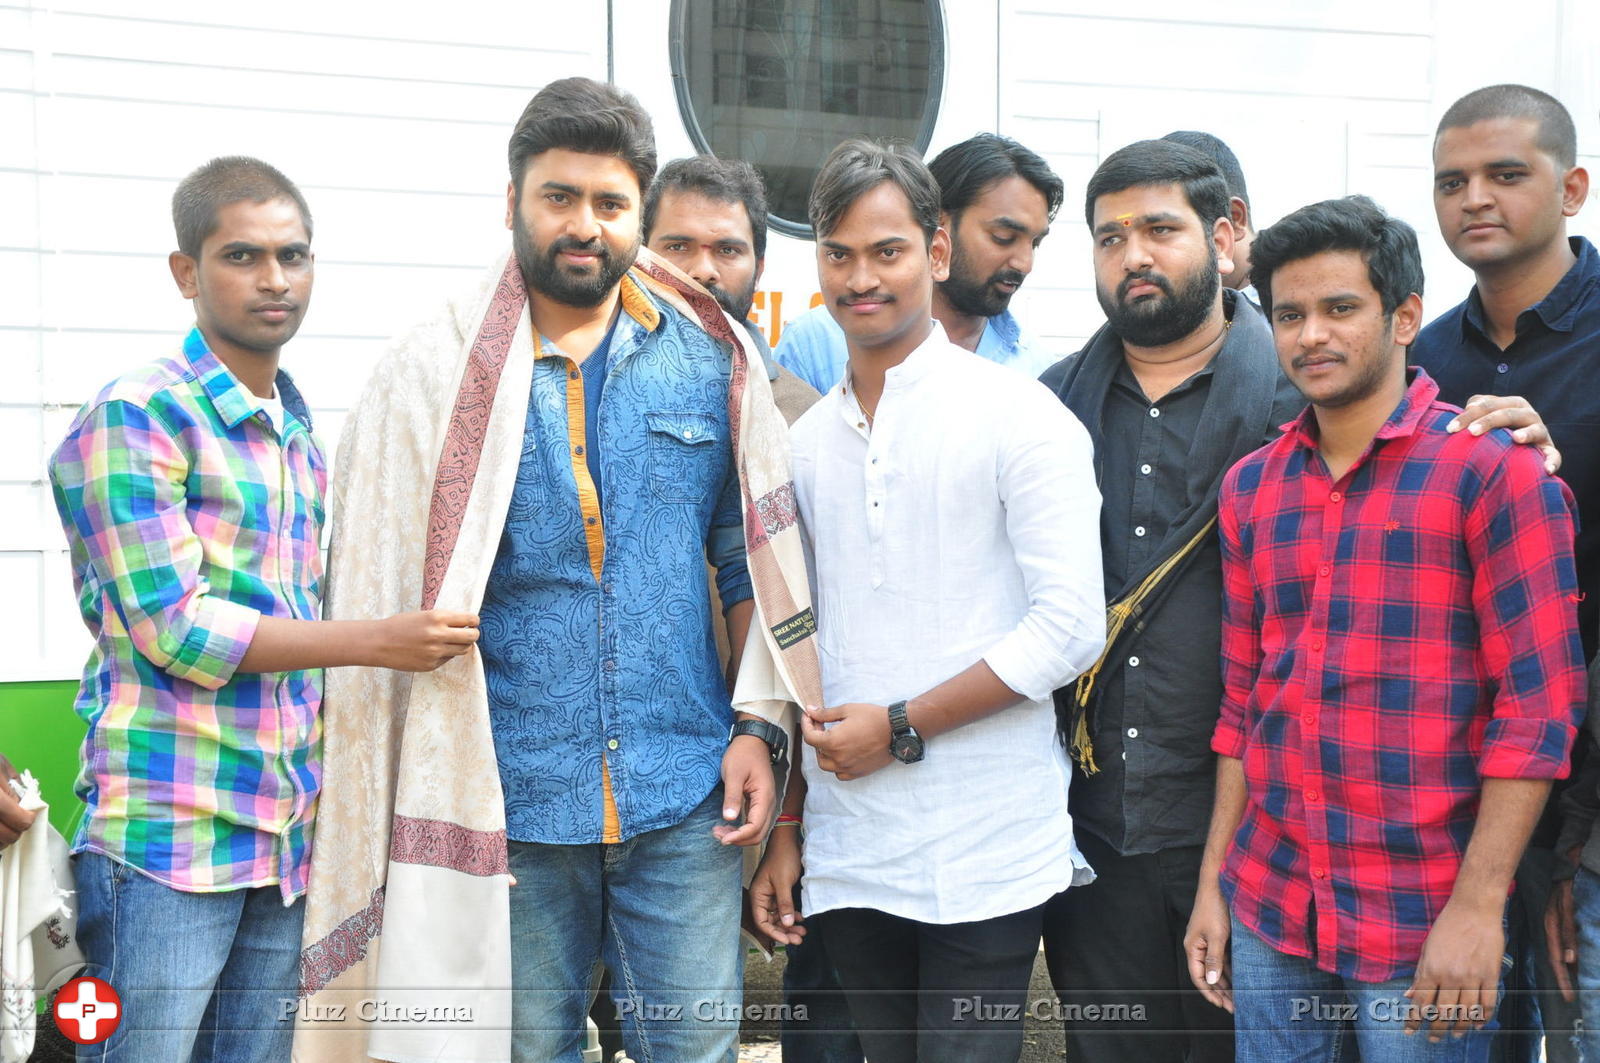 Nara Rohit Fans New Year Calendar Launch Photos | Picture 1197165